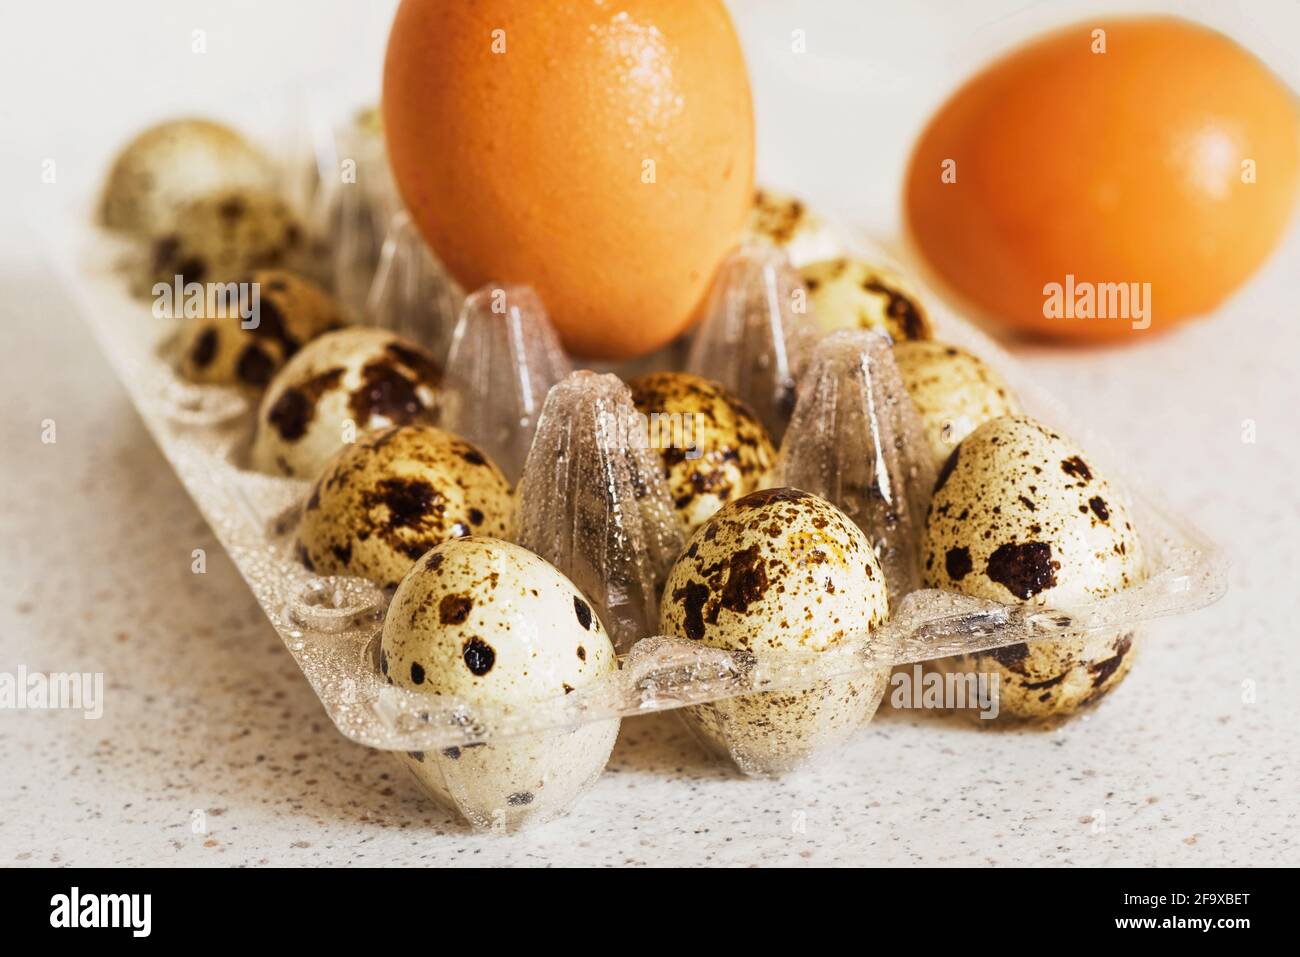 Dewy small quail eggs in contrast with big hen eggs in plastic tray, quail egg with decorative speckled shell,  hen egg with ellloe eggshell. Close up Stock Photo